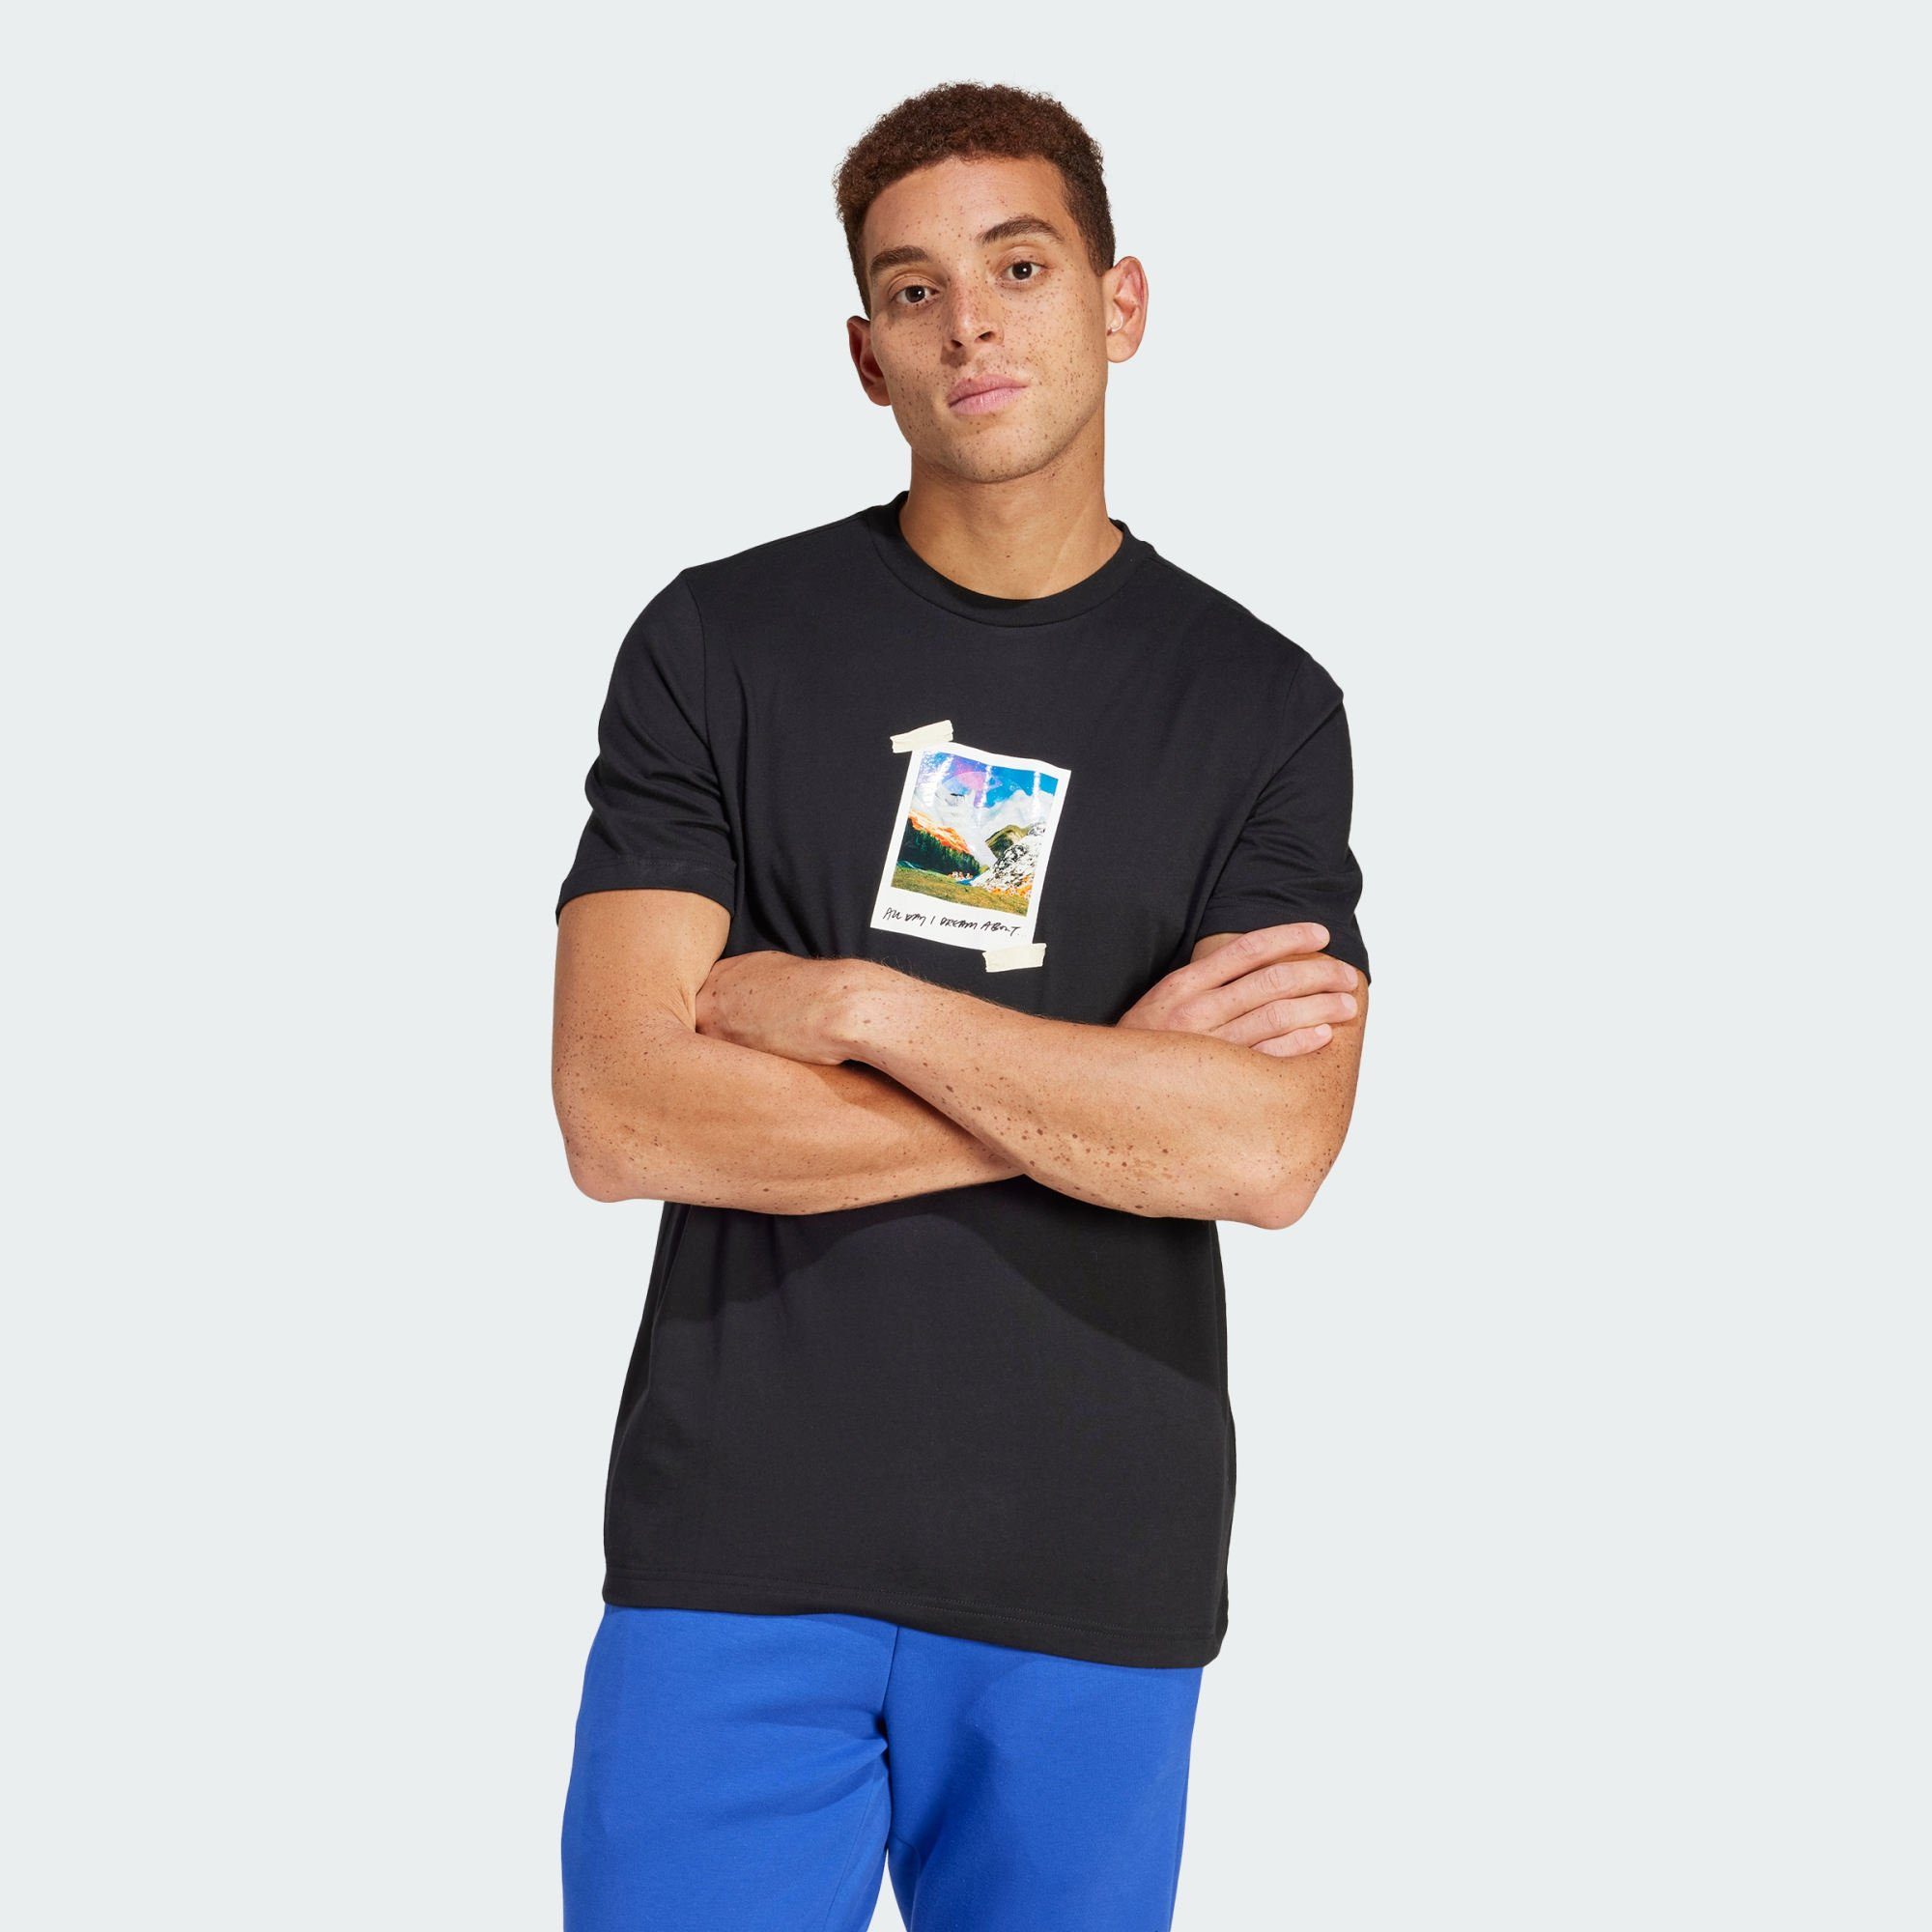 adidas Sportswear T-Shirt ALL DAY T-SHIRT GRAPHIC ABOUT... Black I DREAM